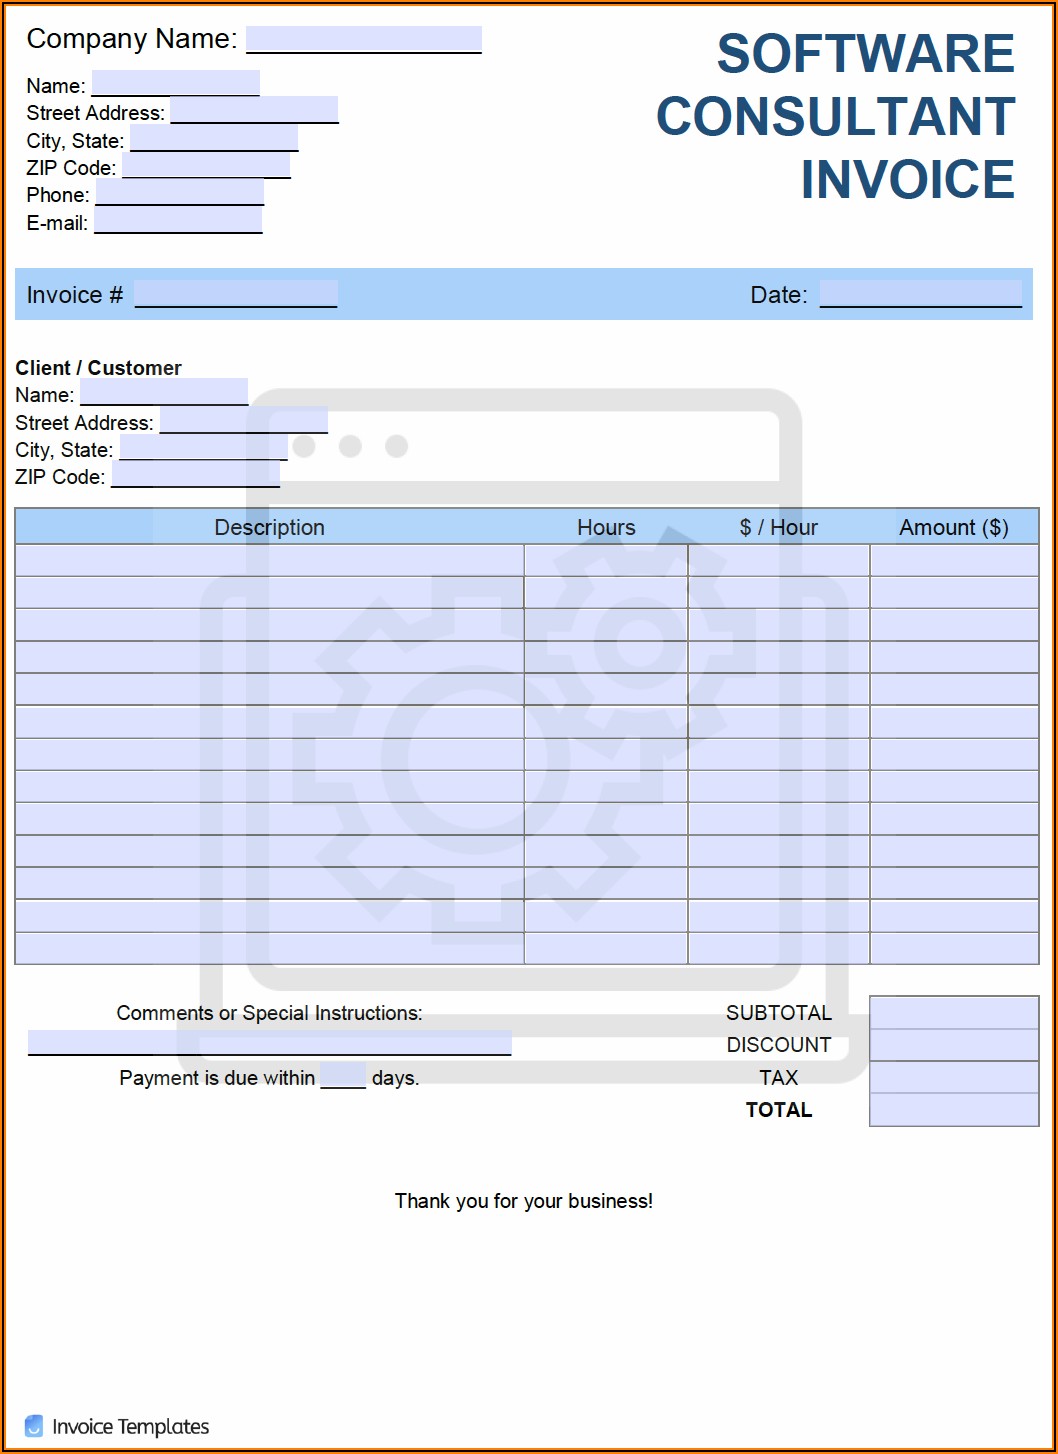 Free Consultant Invoice Template Excel